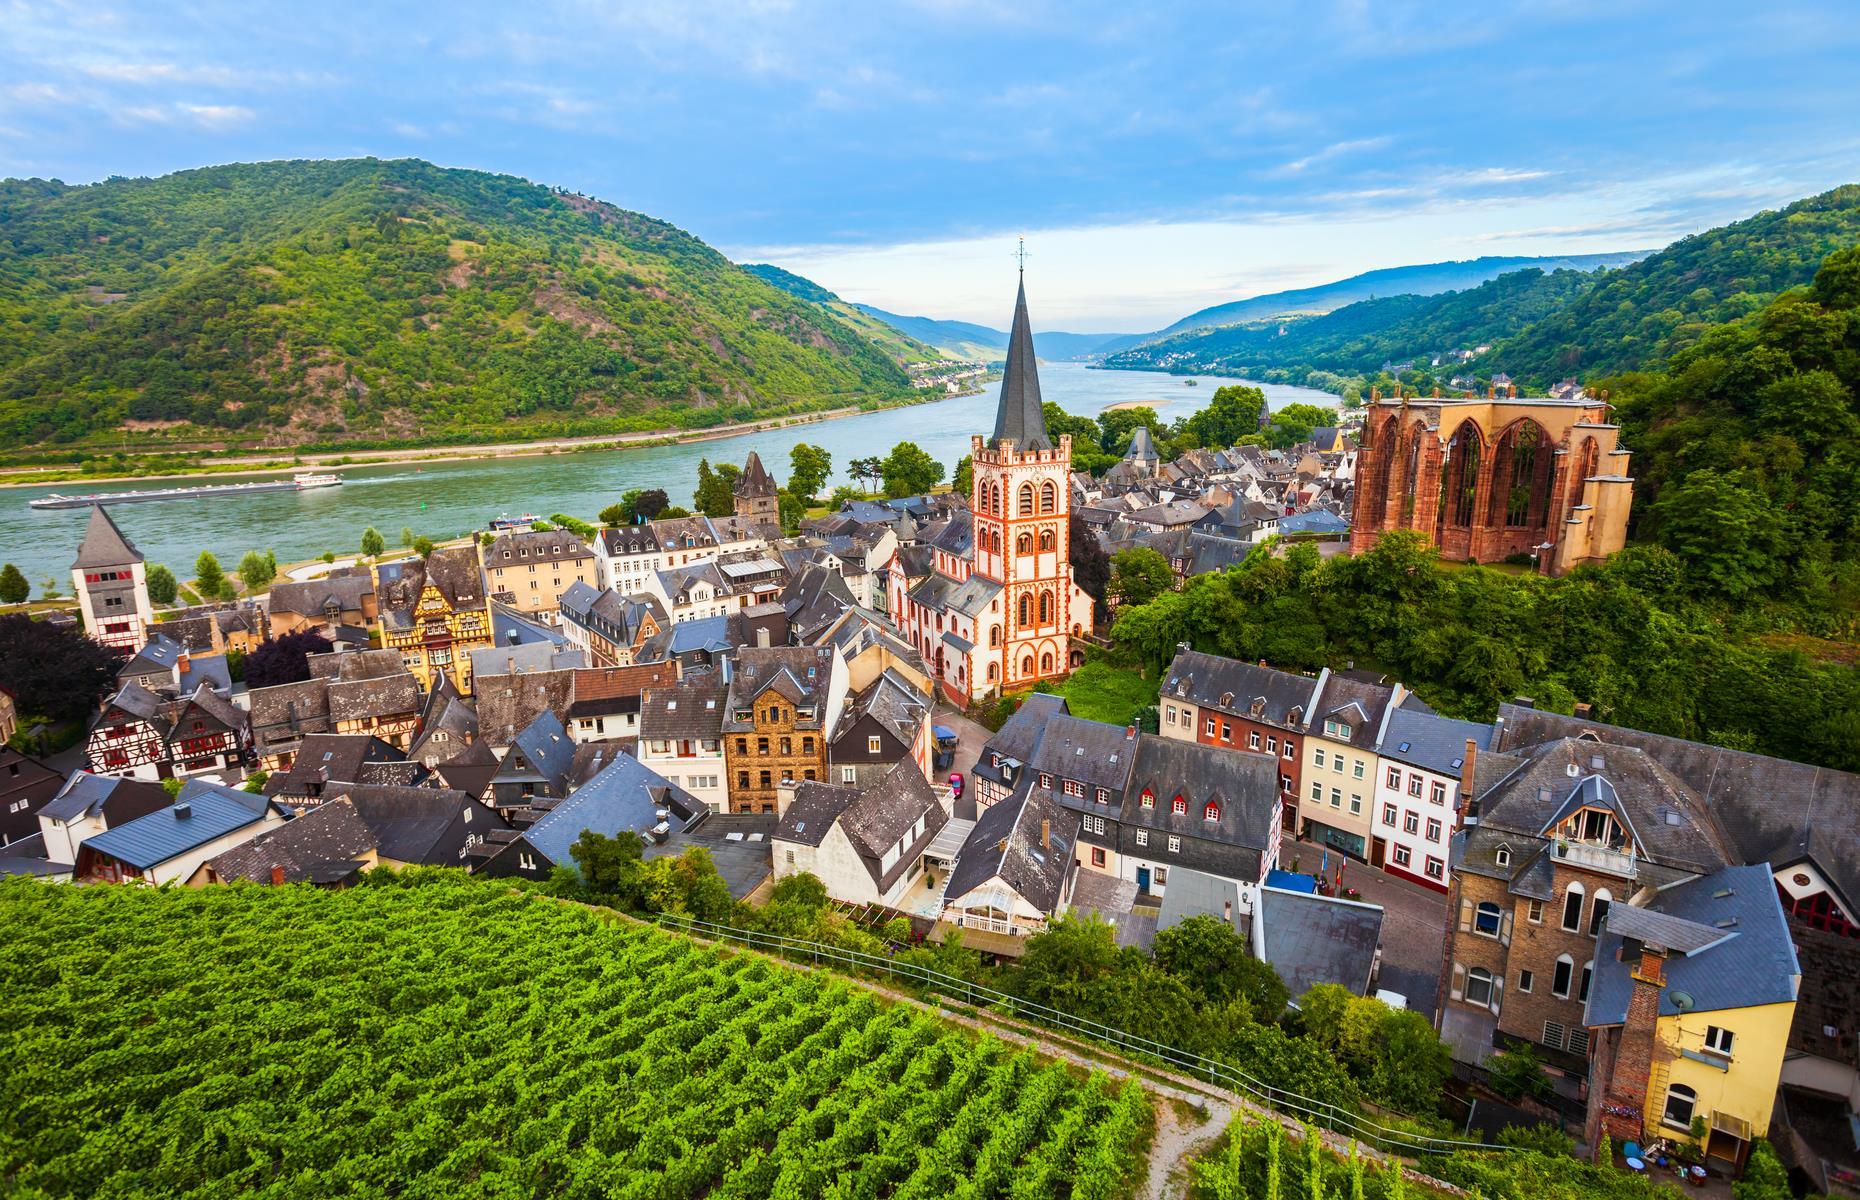 <p>Overlooked by hilltop Stahleck Castle, the beautiful riverside hamlet is a popular stop for river cruisers. It’s a spectacular spot to drink in the views over the Upper Middle Rhine Valley and linger in lush vineyards of the bucolic wine-growing region. And of course, you have to imbibe the local riesling too. Stroll through the medieval gateway to discover the charming village, walk along its 14th-century ramparts and admire the higgledy-piggledy houses that center around the Postenturm (pictured). Take a look at <a href="https://www.loveexploring.com/galleries/76327/50-of-the-most-beautiful-small-towns-in-the-world?page=1">50 of the world's most beautiful towns</a>.</p>